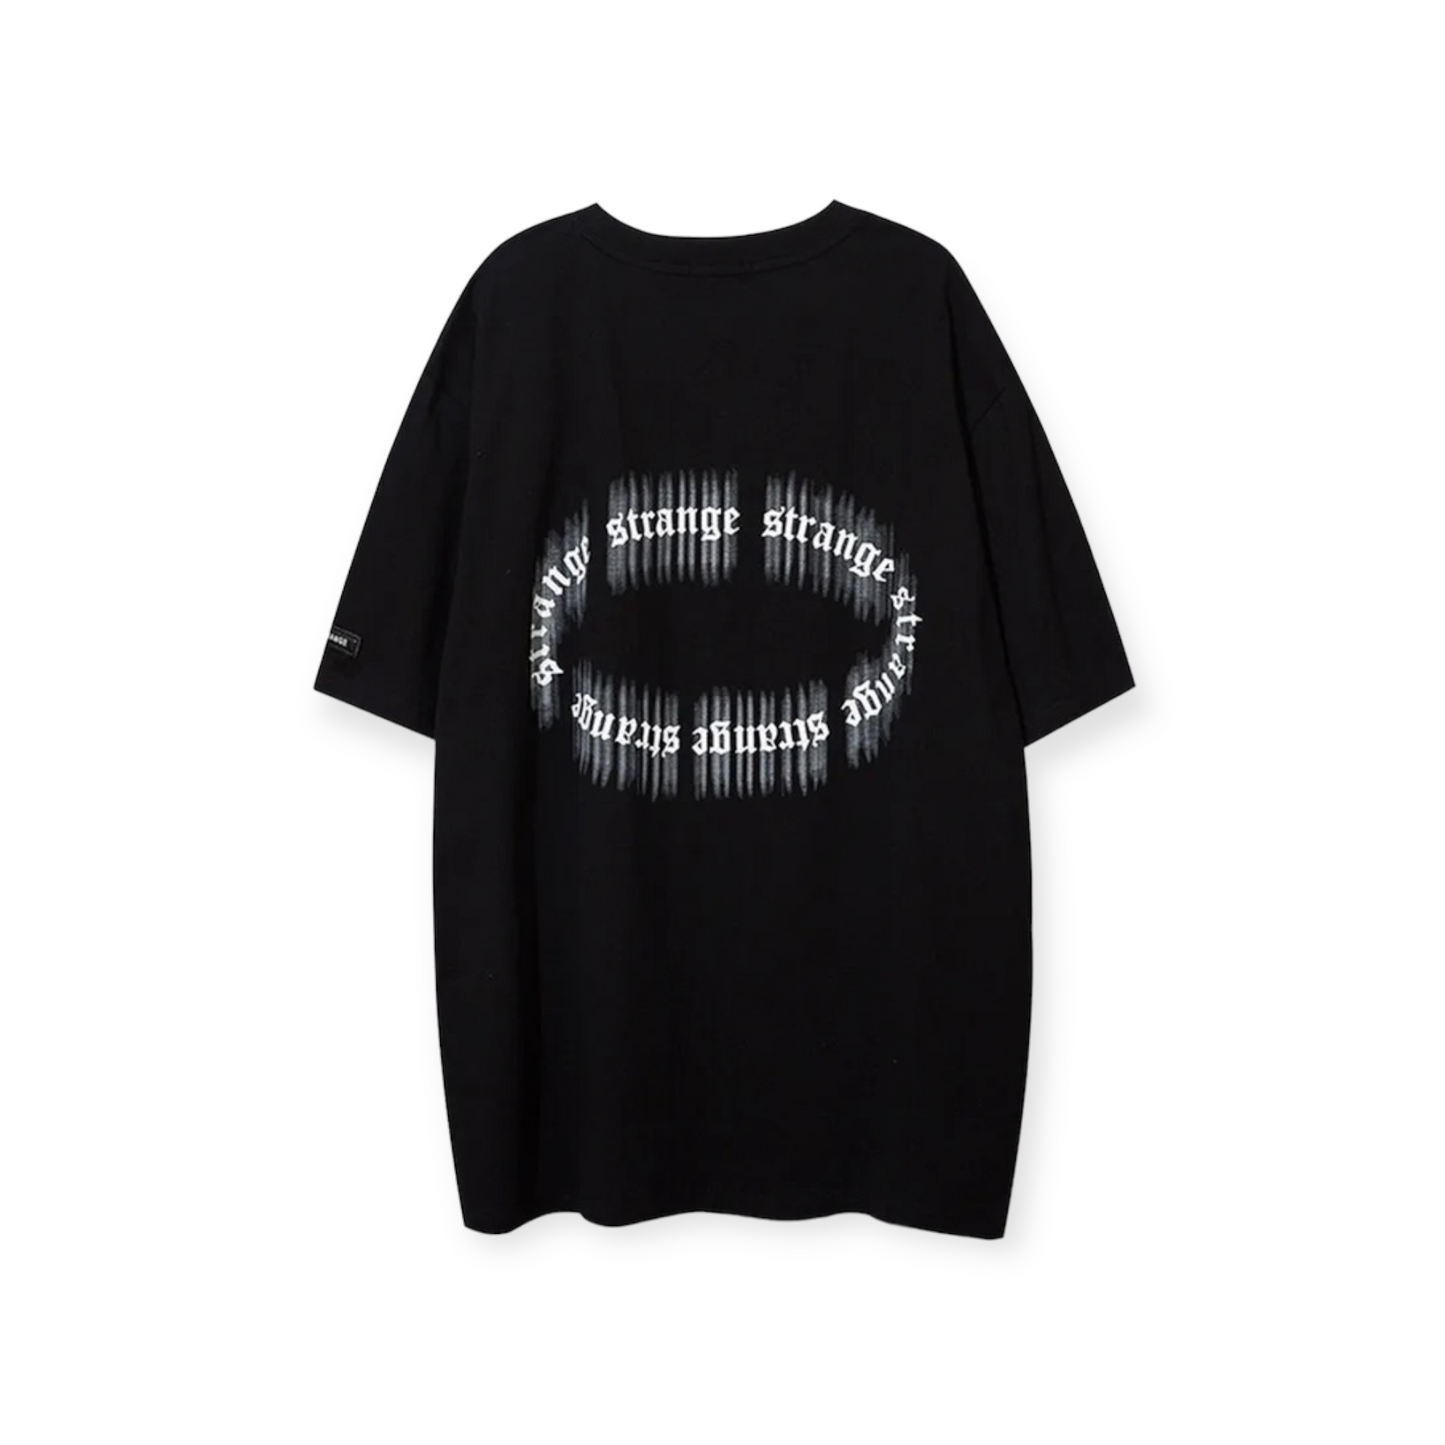 Aolamegs Boy Printed Oversized T Shirt